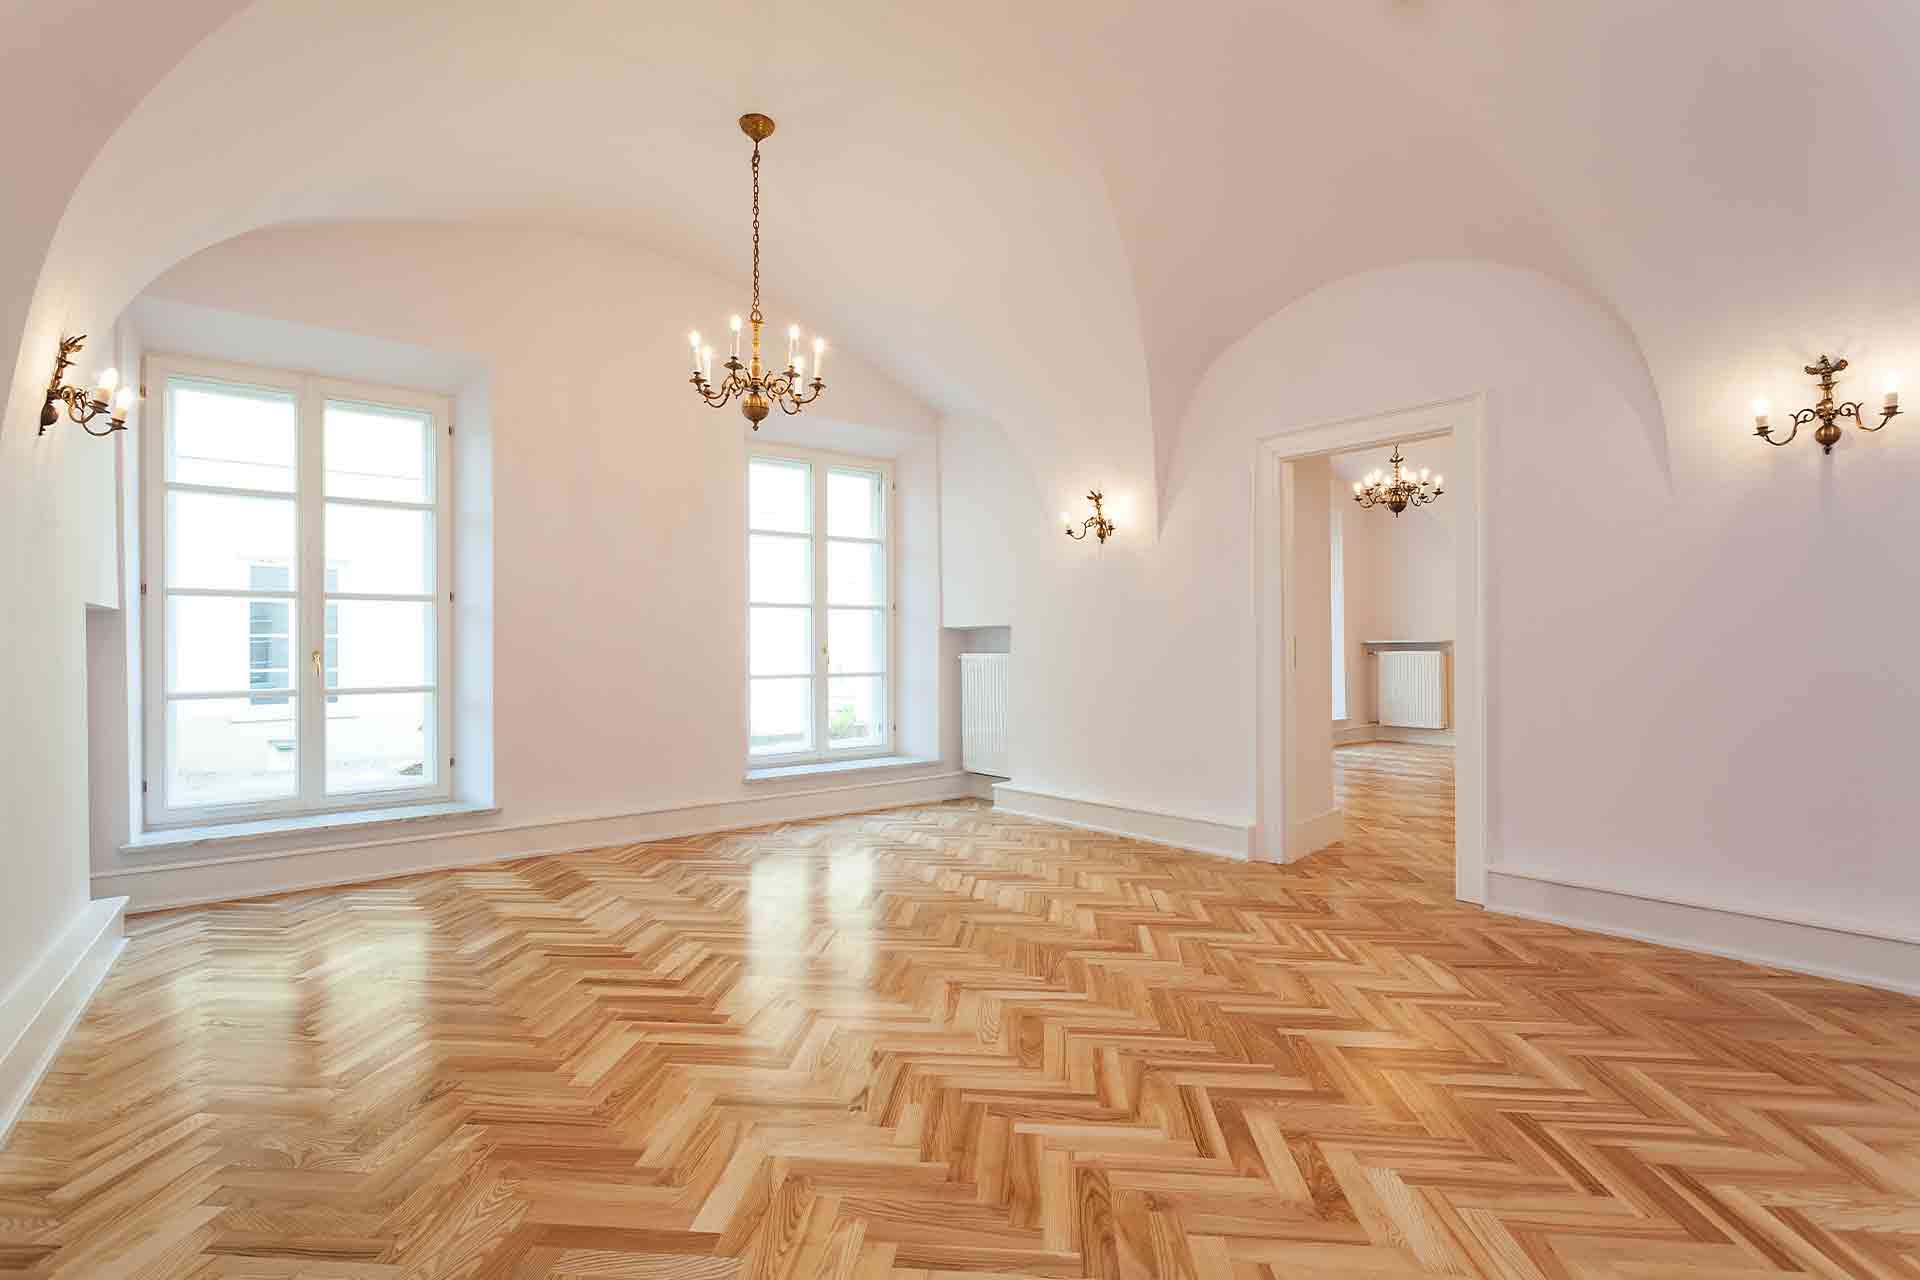 Parquet Flooring Cost, How Much Does It Cost To Replace Parquet Flooring